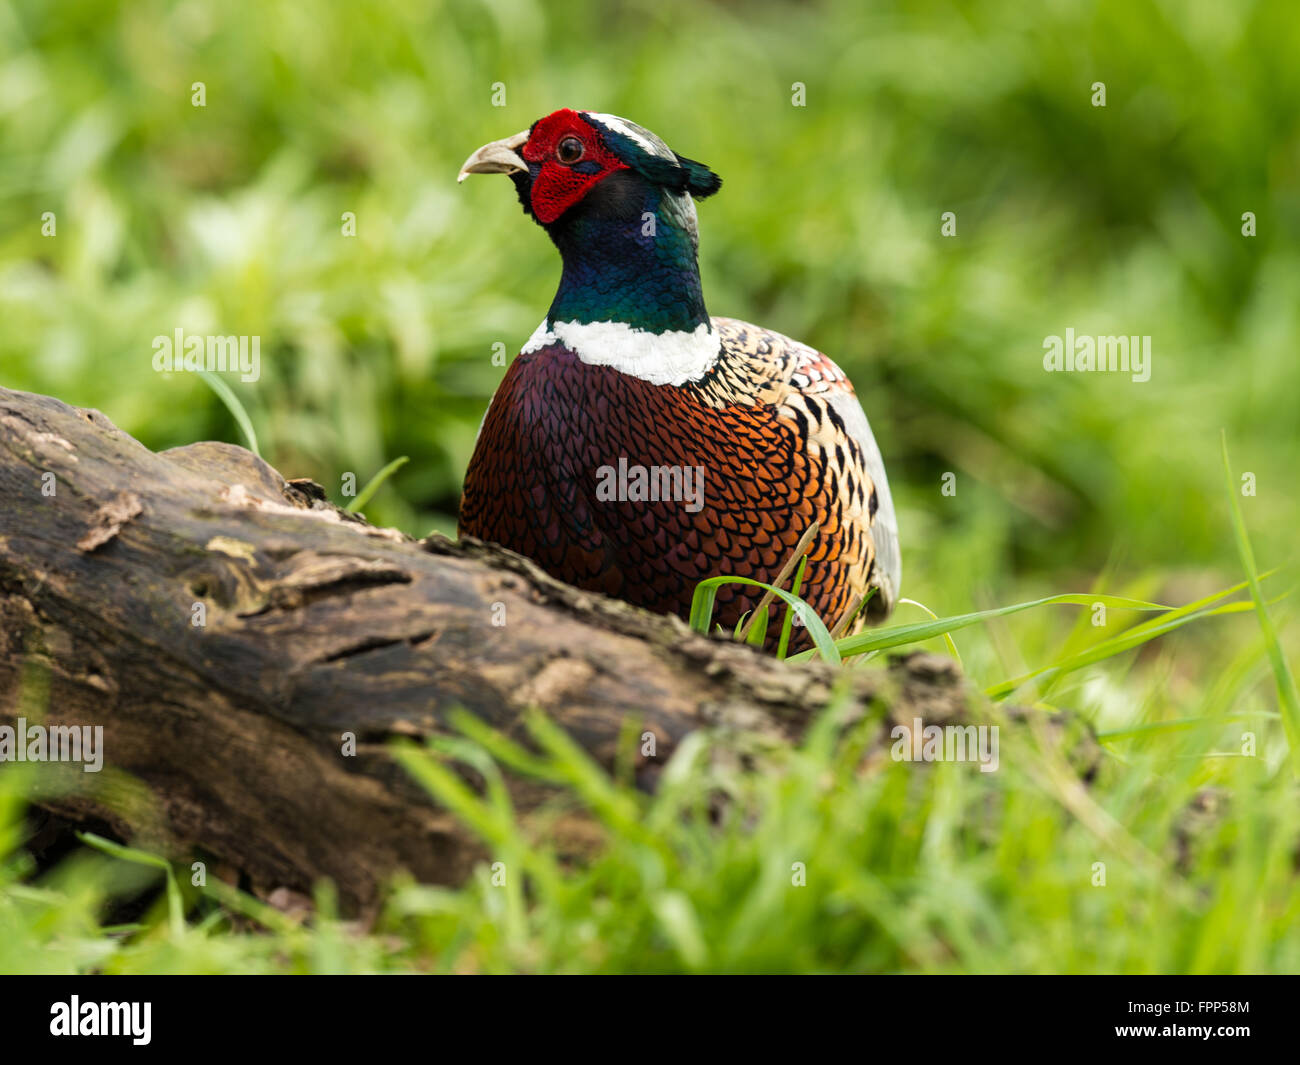 Beautiful Male Ring-necked Pheasant (Phasianus colchicus) foraging in natural woodland forest setting. Stock Photo